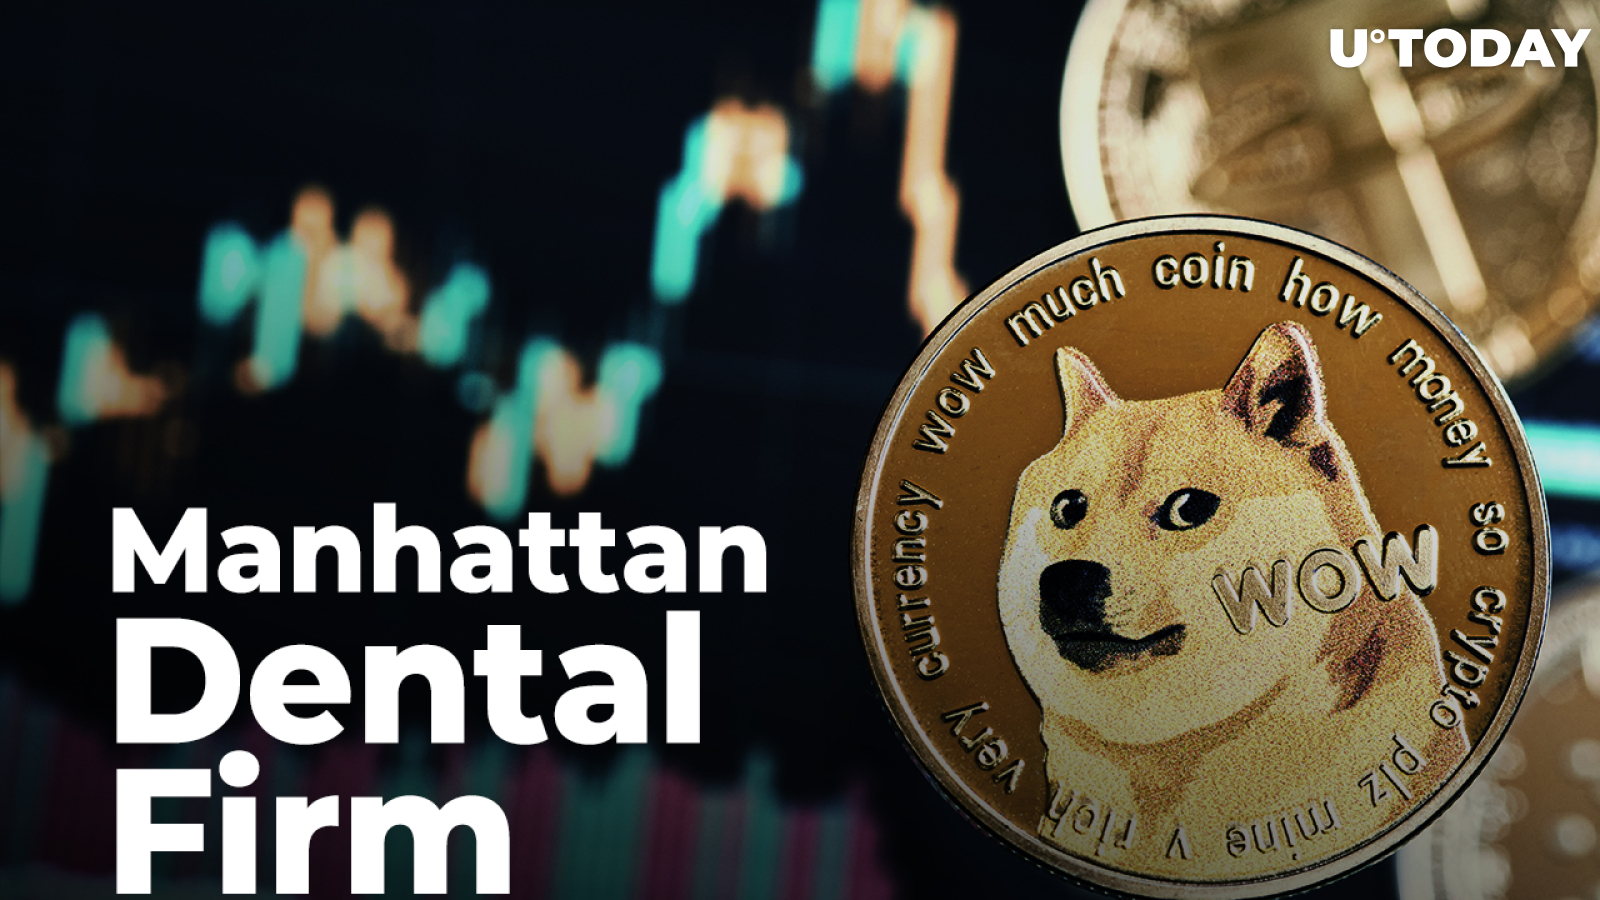 Dogecoin Now Accepted by Manhattan Dental Firm